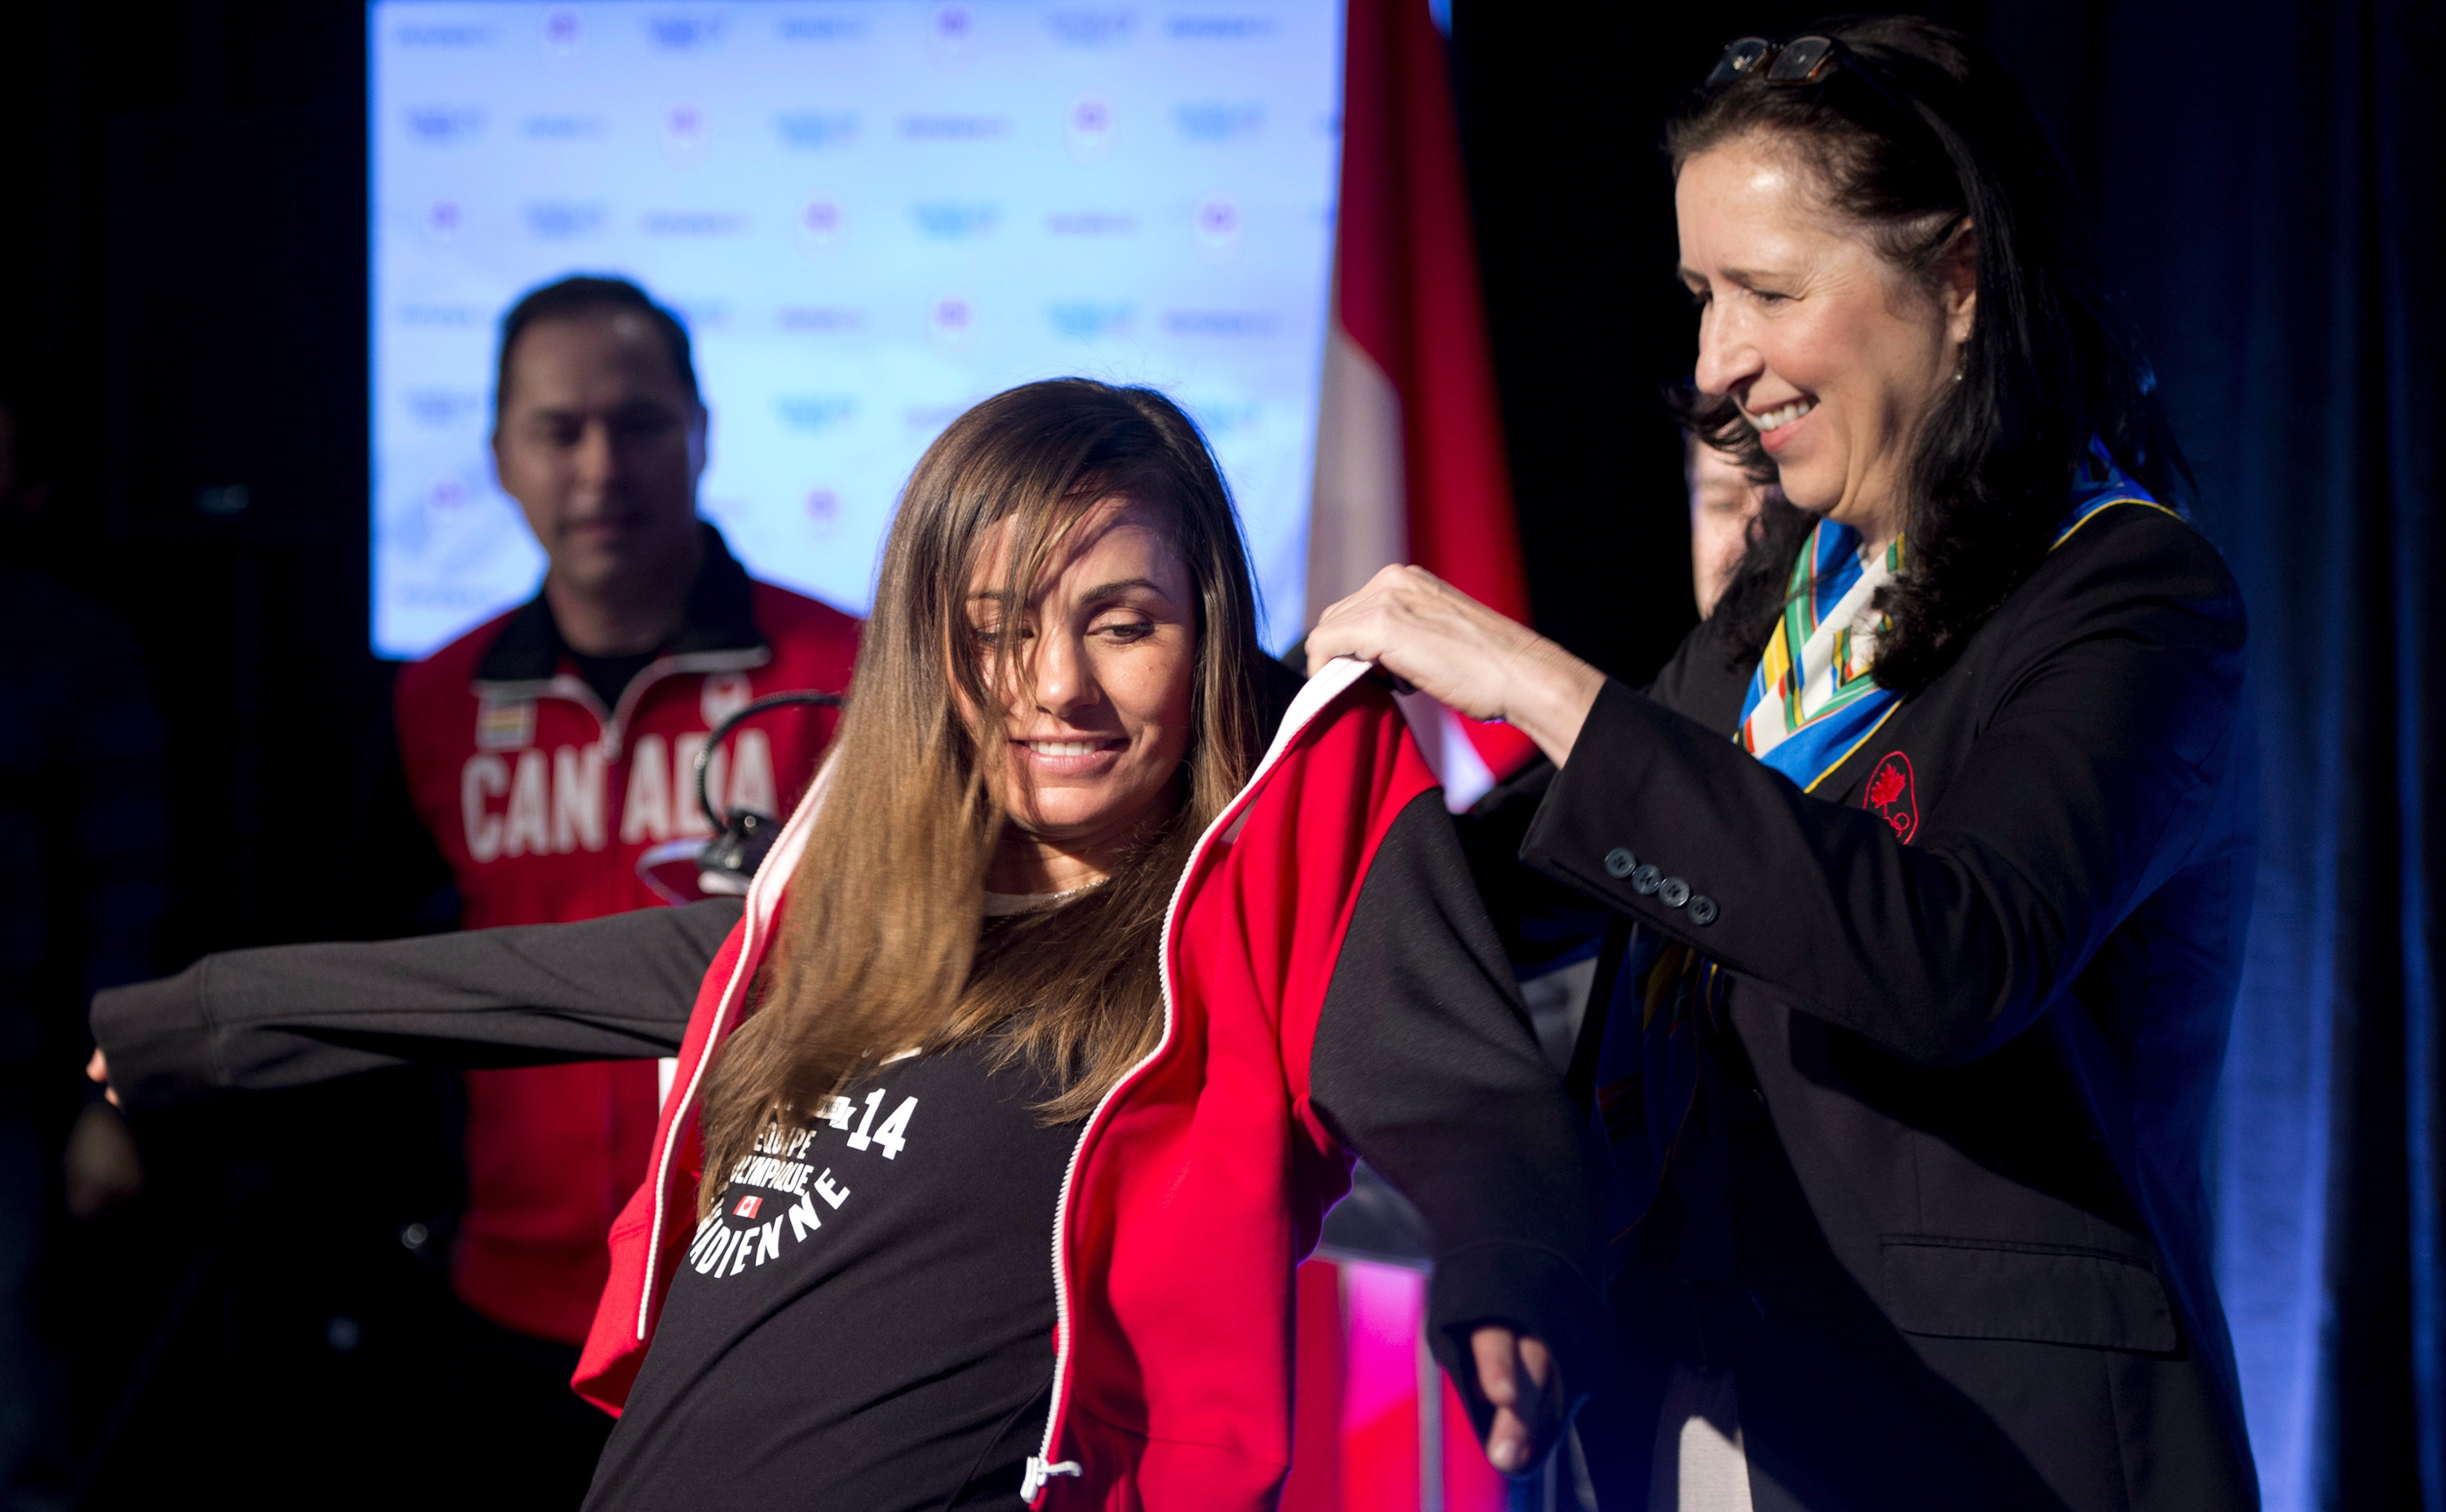 Tricia Smith, vice-president of the Canadian Olympic Committee presents Canadian snowboard team member Maelle Ricker of West Vancouver with her team jacket during the team announcement in Vancouver,Friday, Jan. 3, 2014. THE CANADIAN PRESS/Jonathan Hayward